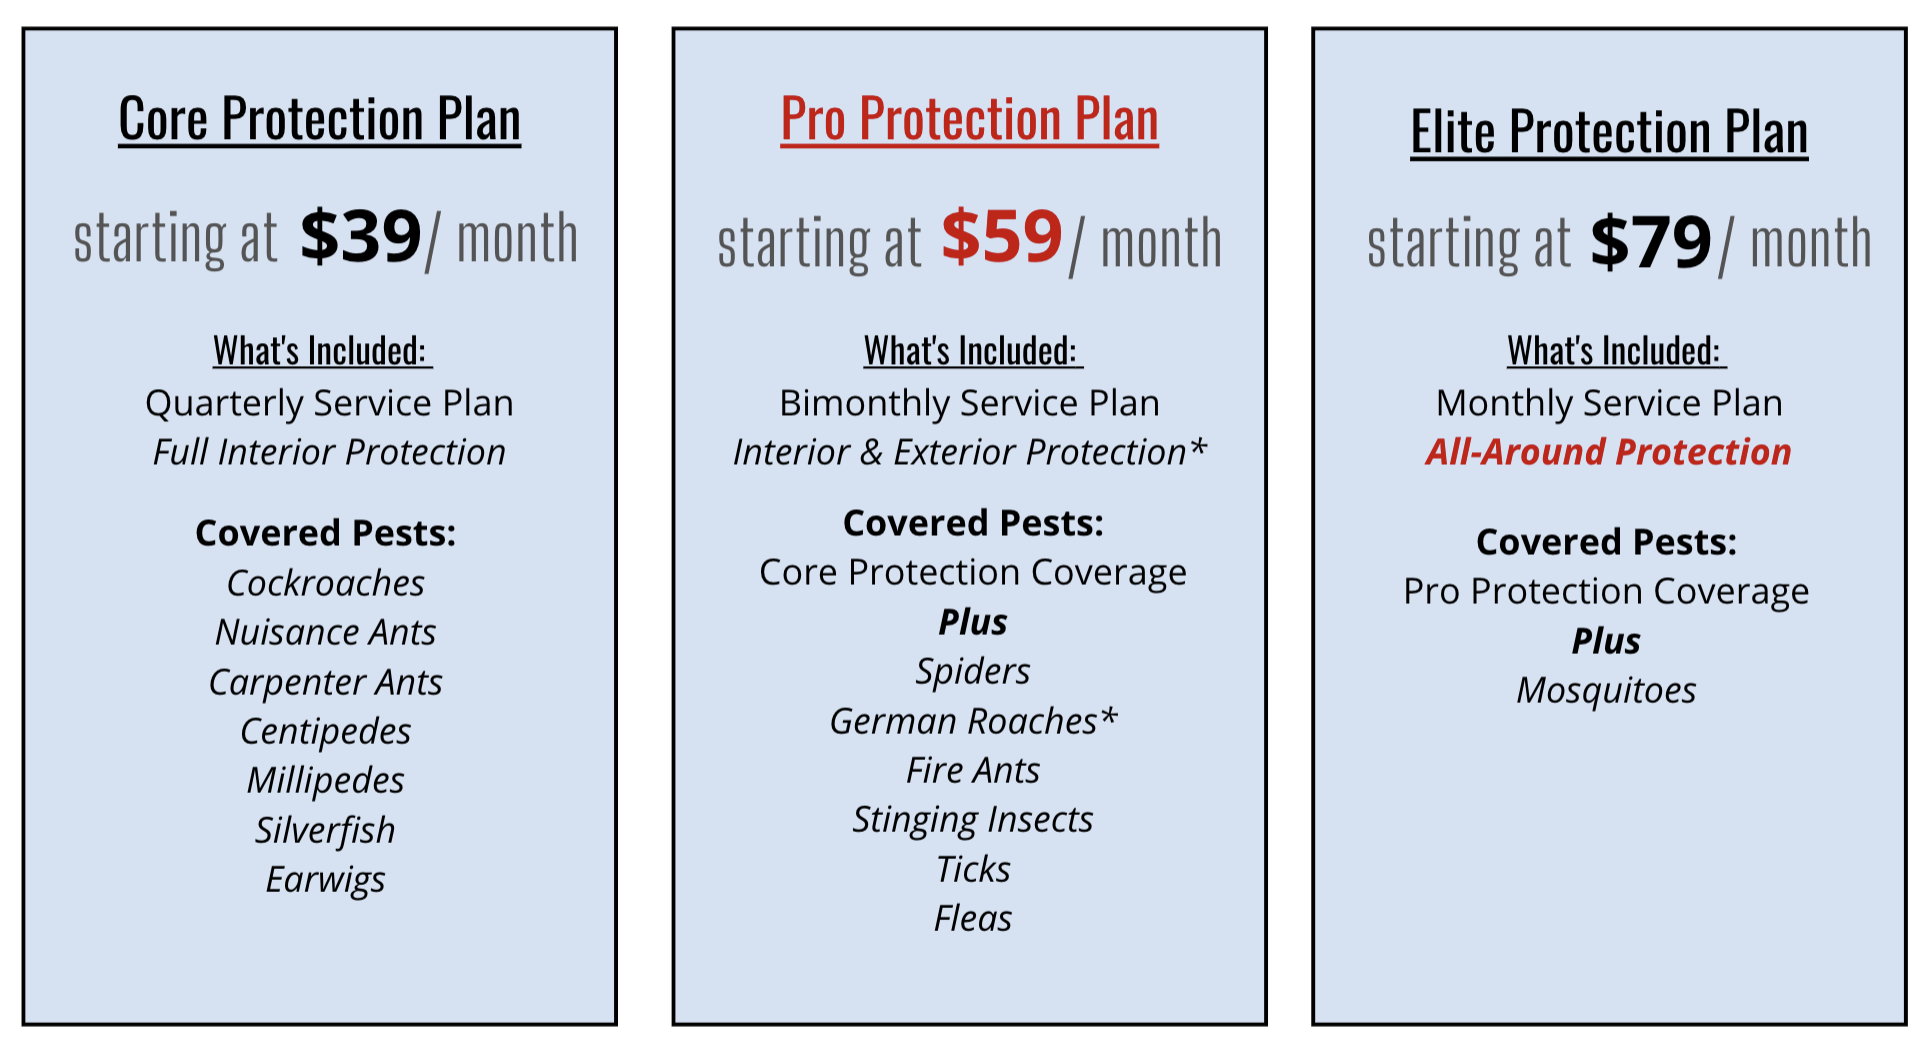 Comparing Protection Plans